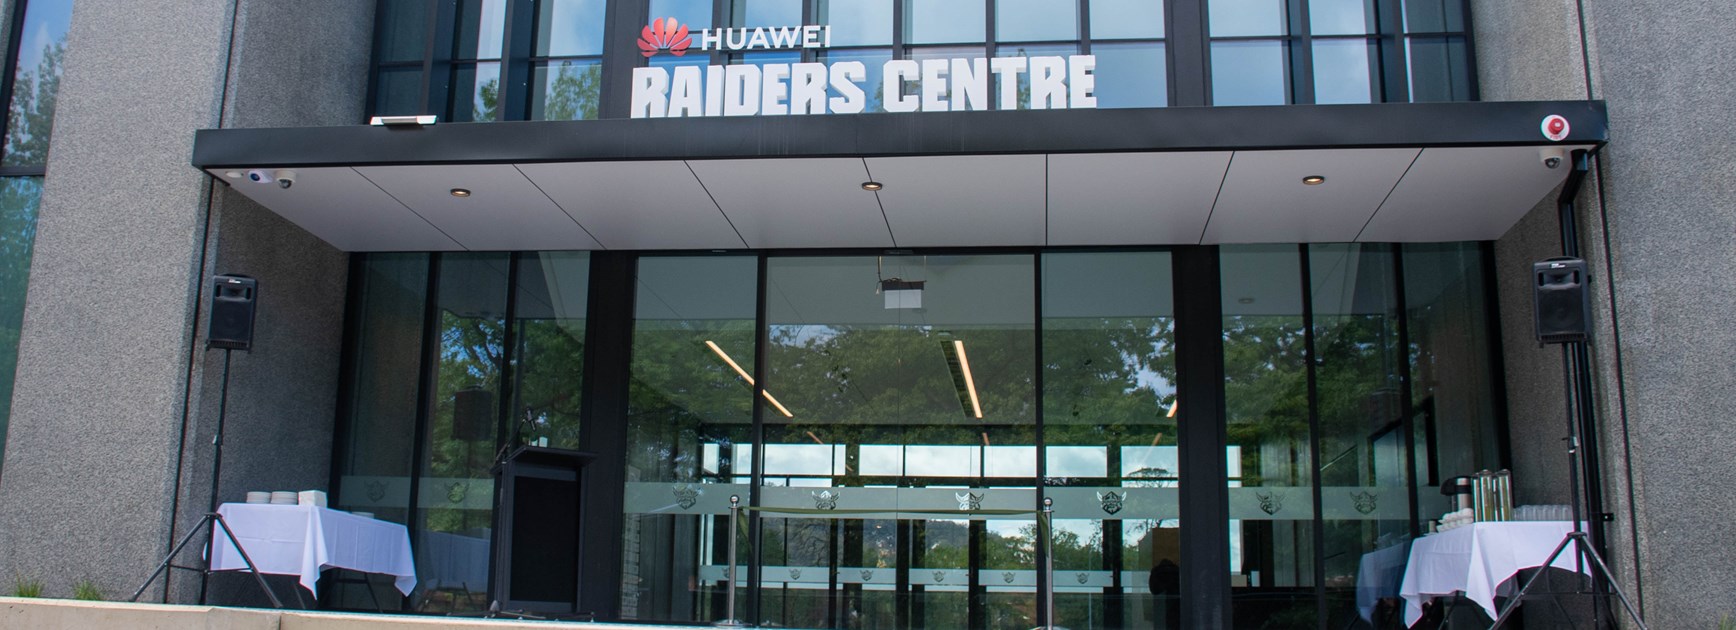 Updated Information: Huawei Raiders Centre